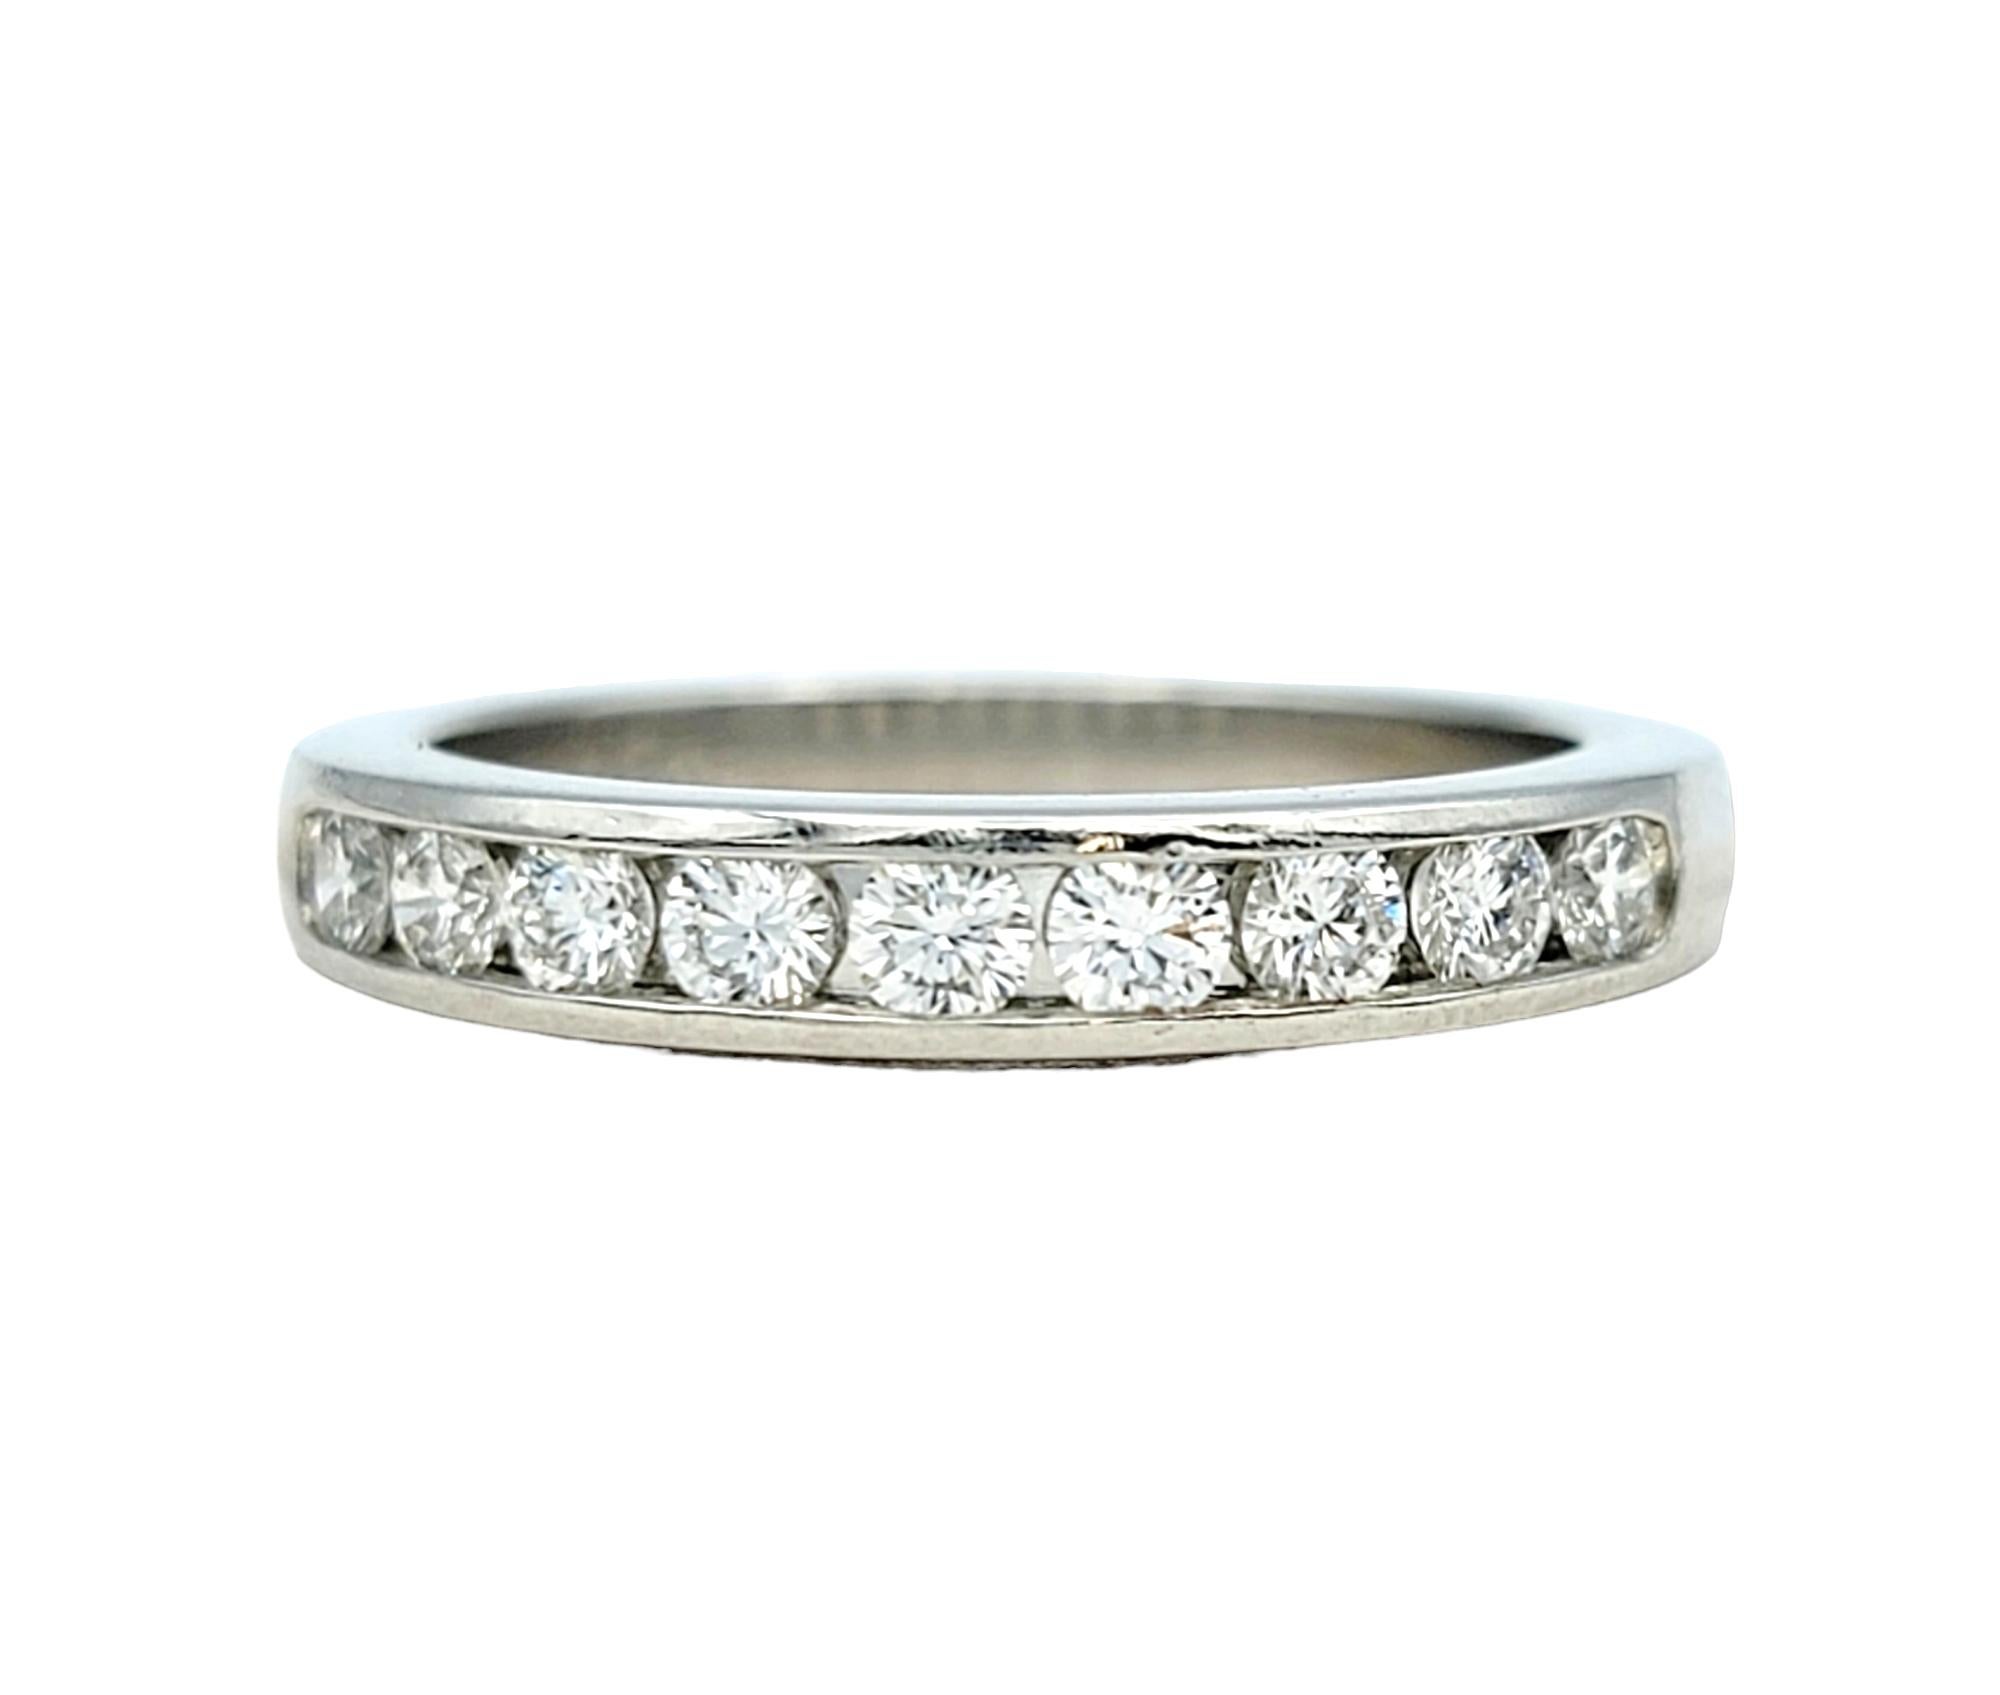 Ring size: 3.75

This exquisite Tiffany & Co. wedding band is a symbol of eternal love and commitment. Crafted from lustrous platinum, it exudes timeless elegance and durability, a fitting representation of a lasting marriage.

The ring features a